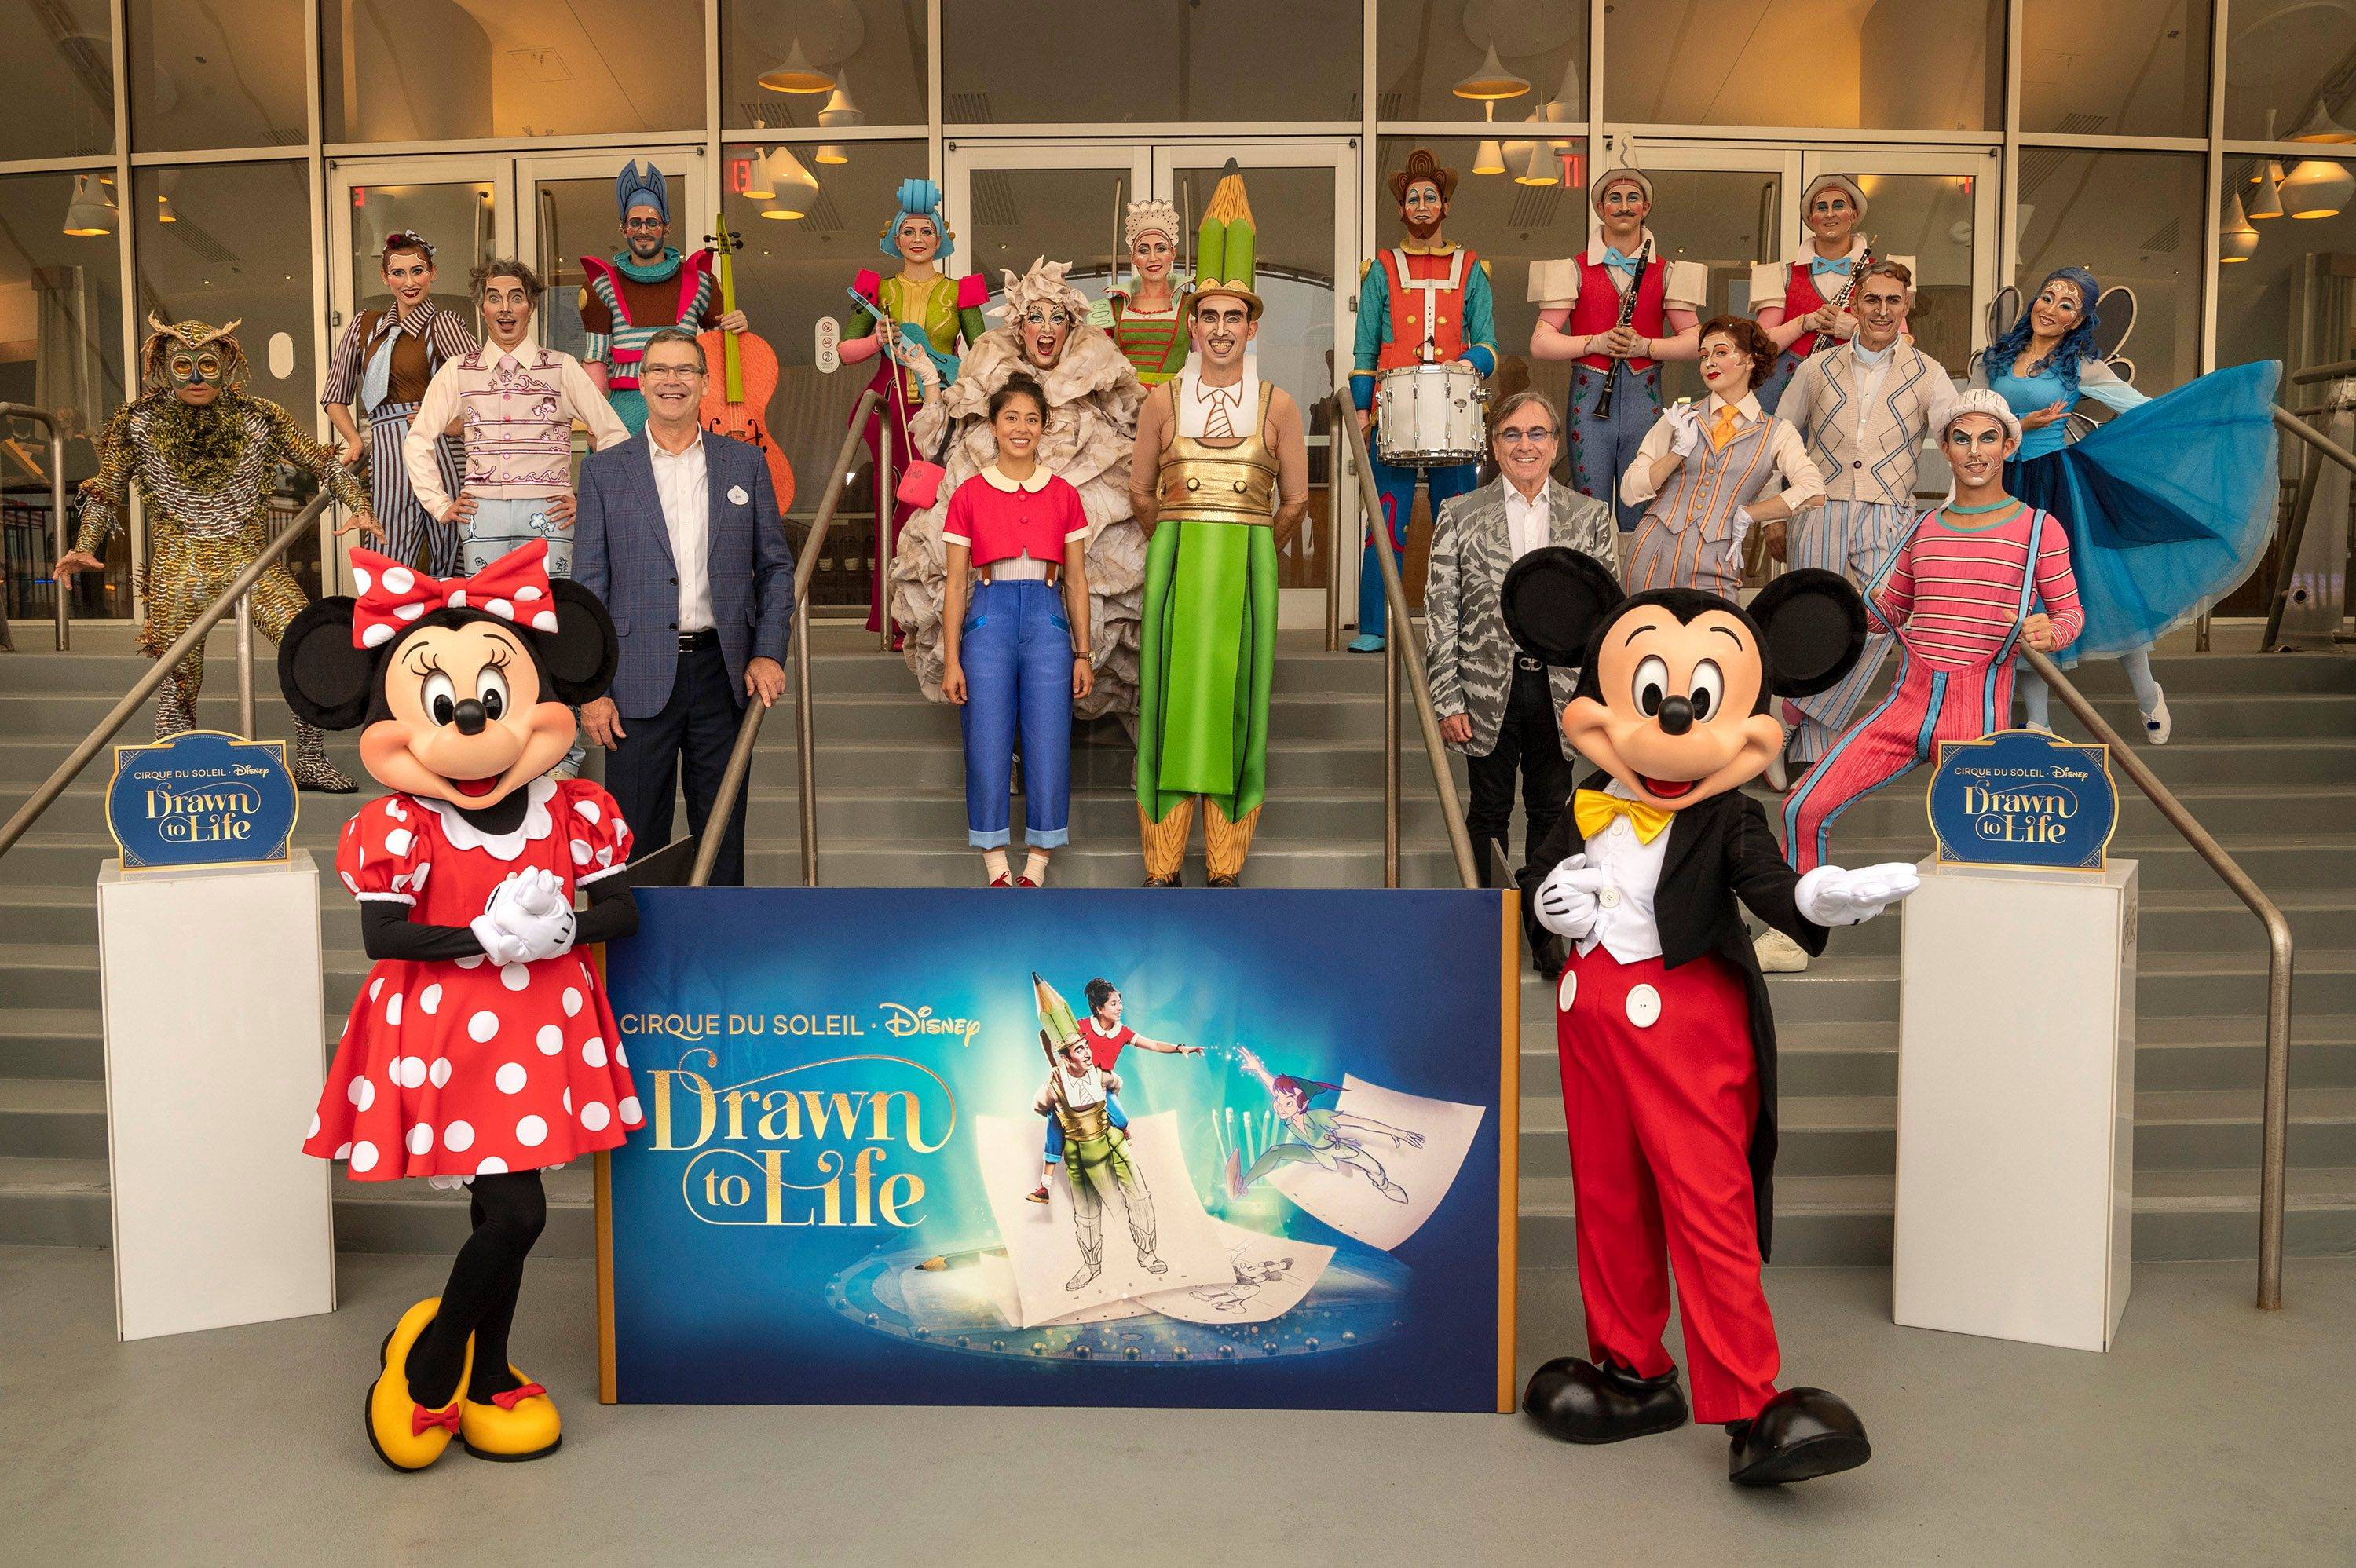 Front row from left to right: Minnie Mouse, Walt Disney World Resort President Jeff Vahle, the characters Julie and Mr. Pencil, Cirque du Soleil President and CEO Daniel Lamarre, and Mickey Mouse join artists from Drawn to Life, the highly anticipated new collaboration from Cirque du Soleil and Disney.